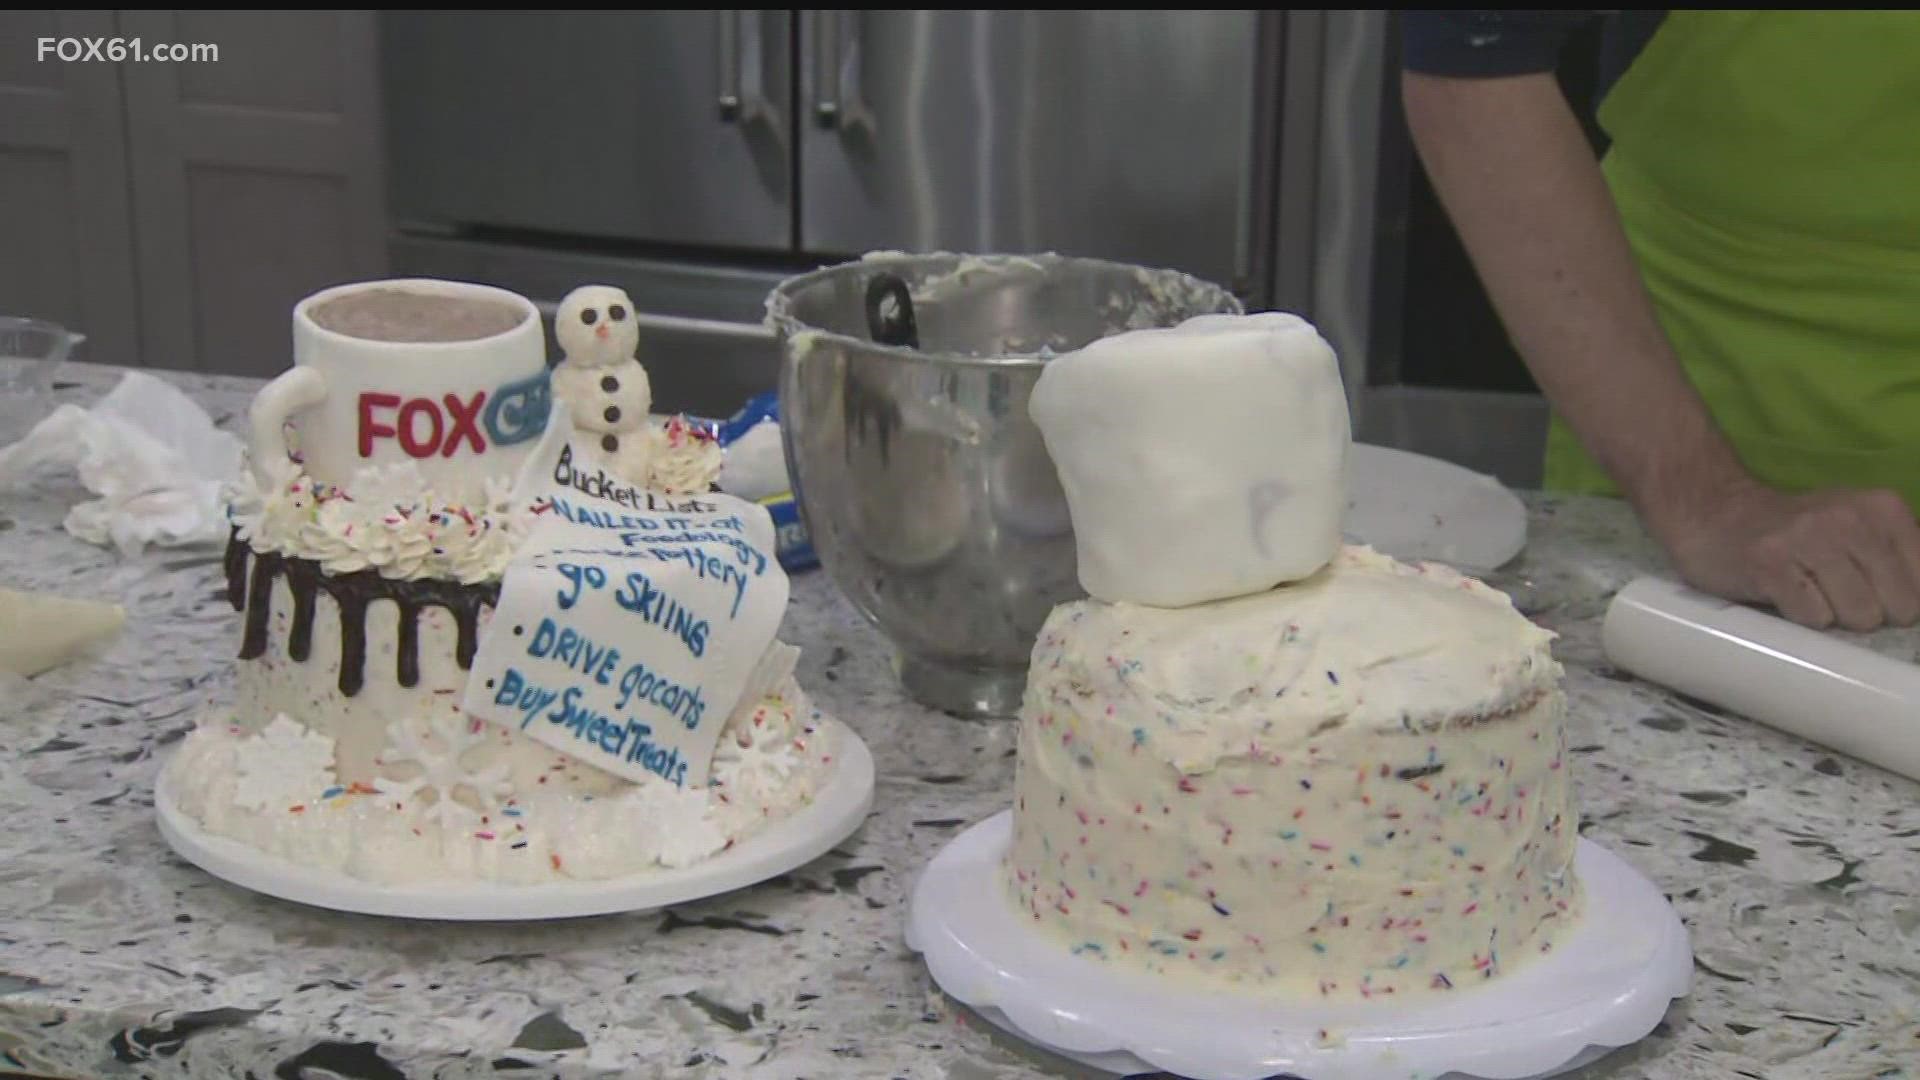 Keith McGilvery and Rachel Piscitelli race to see who can make the most delicious winter-themed cake!